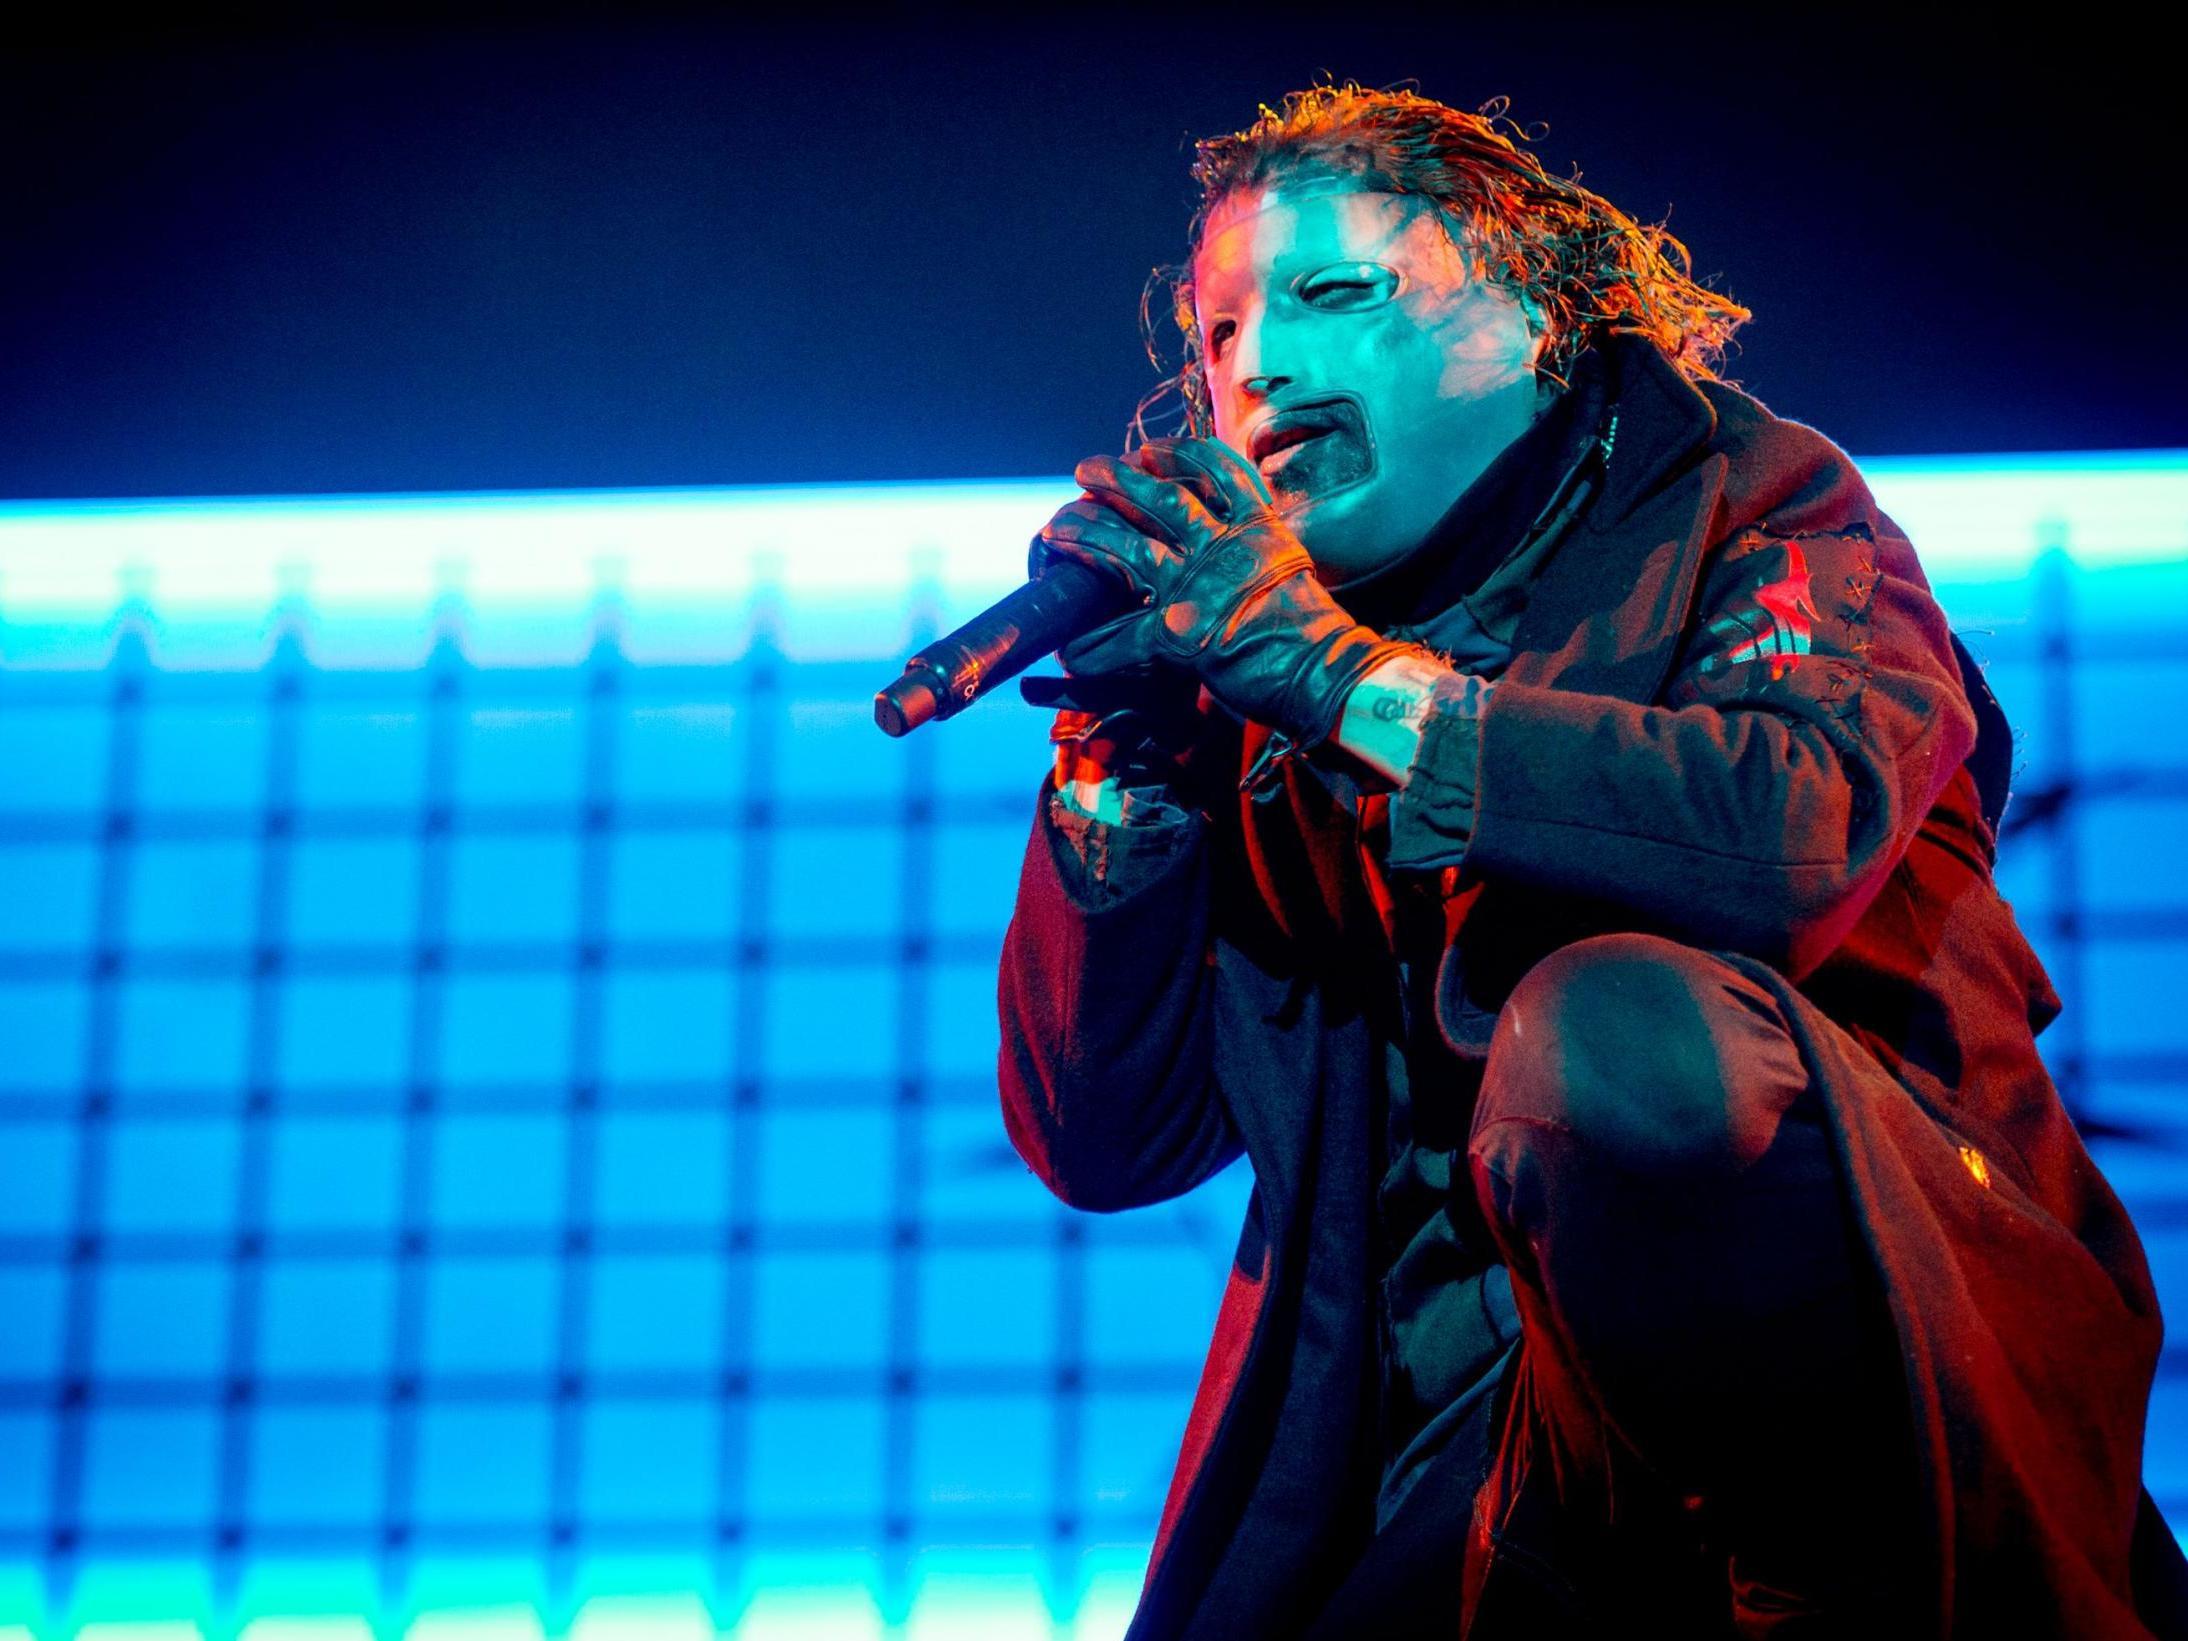 Slipknot review, We Are Not Your Kind: The rage they capture is